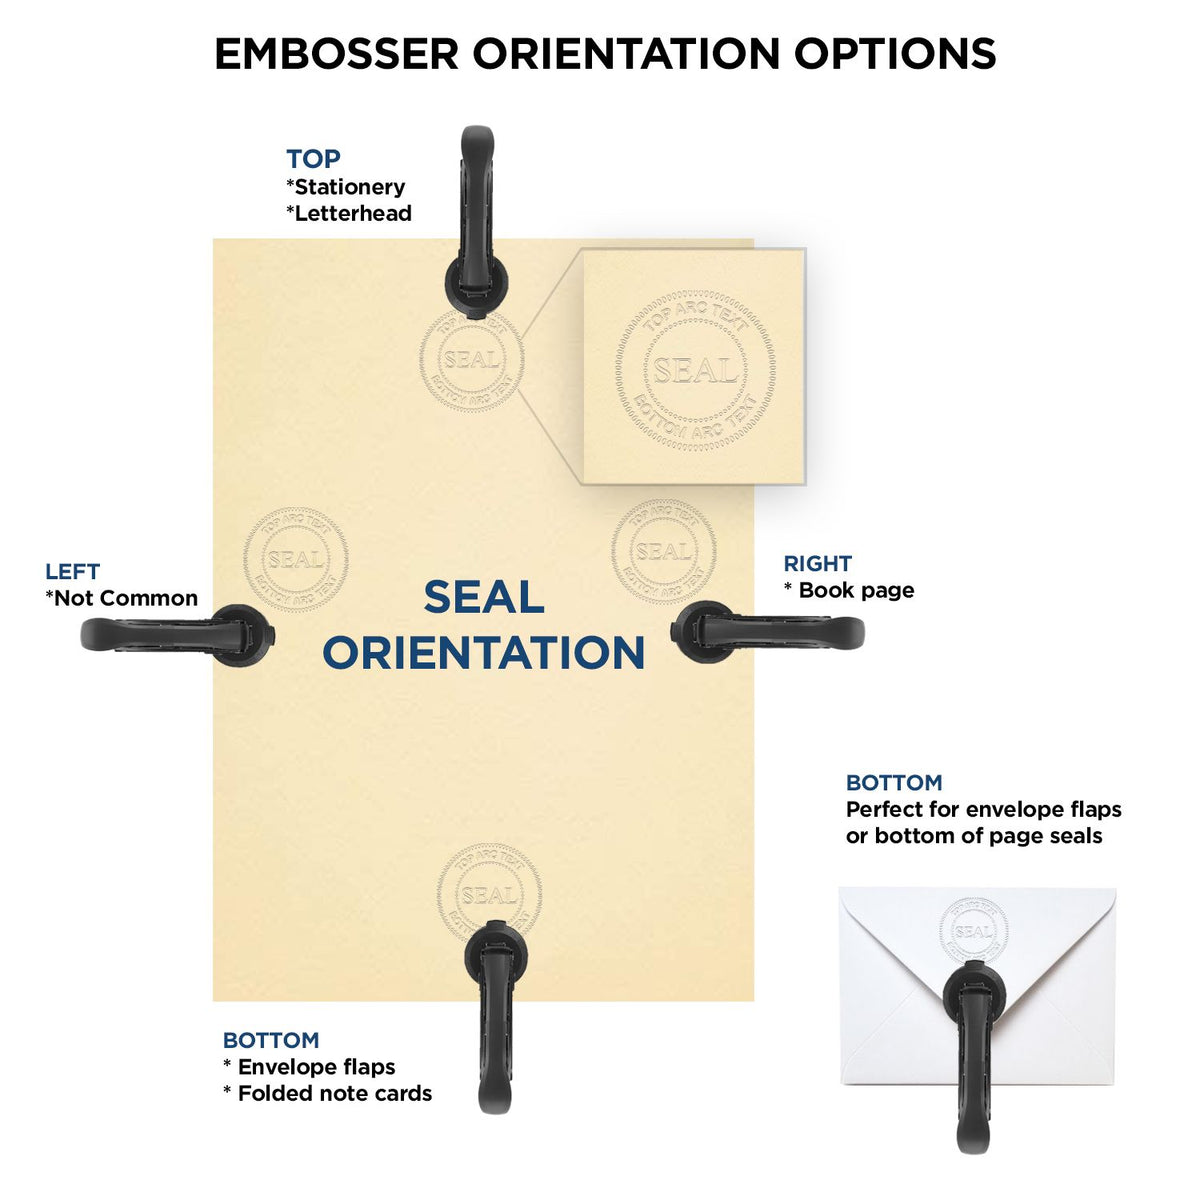 An infographic for the Extended Long Reach Nevada Surveyor Embosser showing embosser orientation, this is showing examples of a top, bottom, right and left insert.